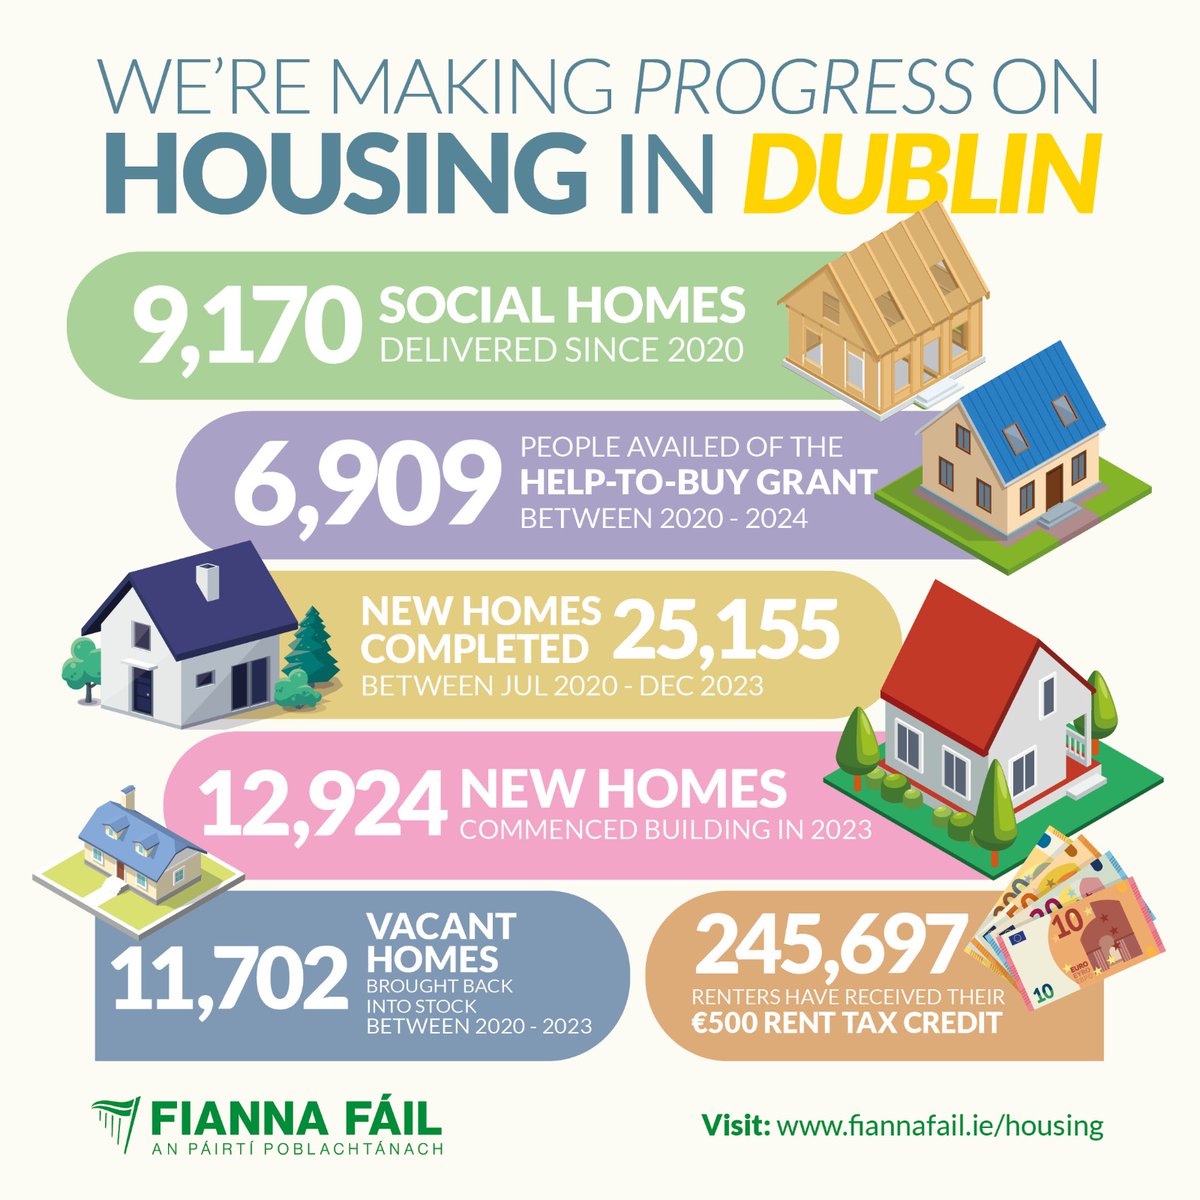 We have a lot more work to do on #housing supply in Dublin but we are making real progress under the leadership of @DarraghOBrienTD. See below the latest figures on #housing in #Dublin 👇